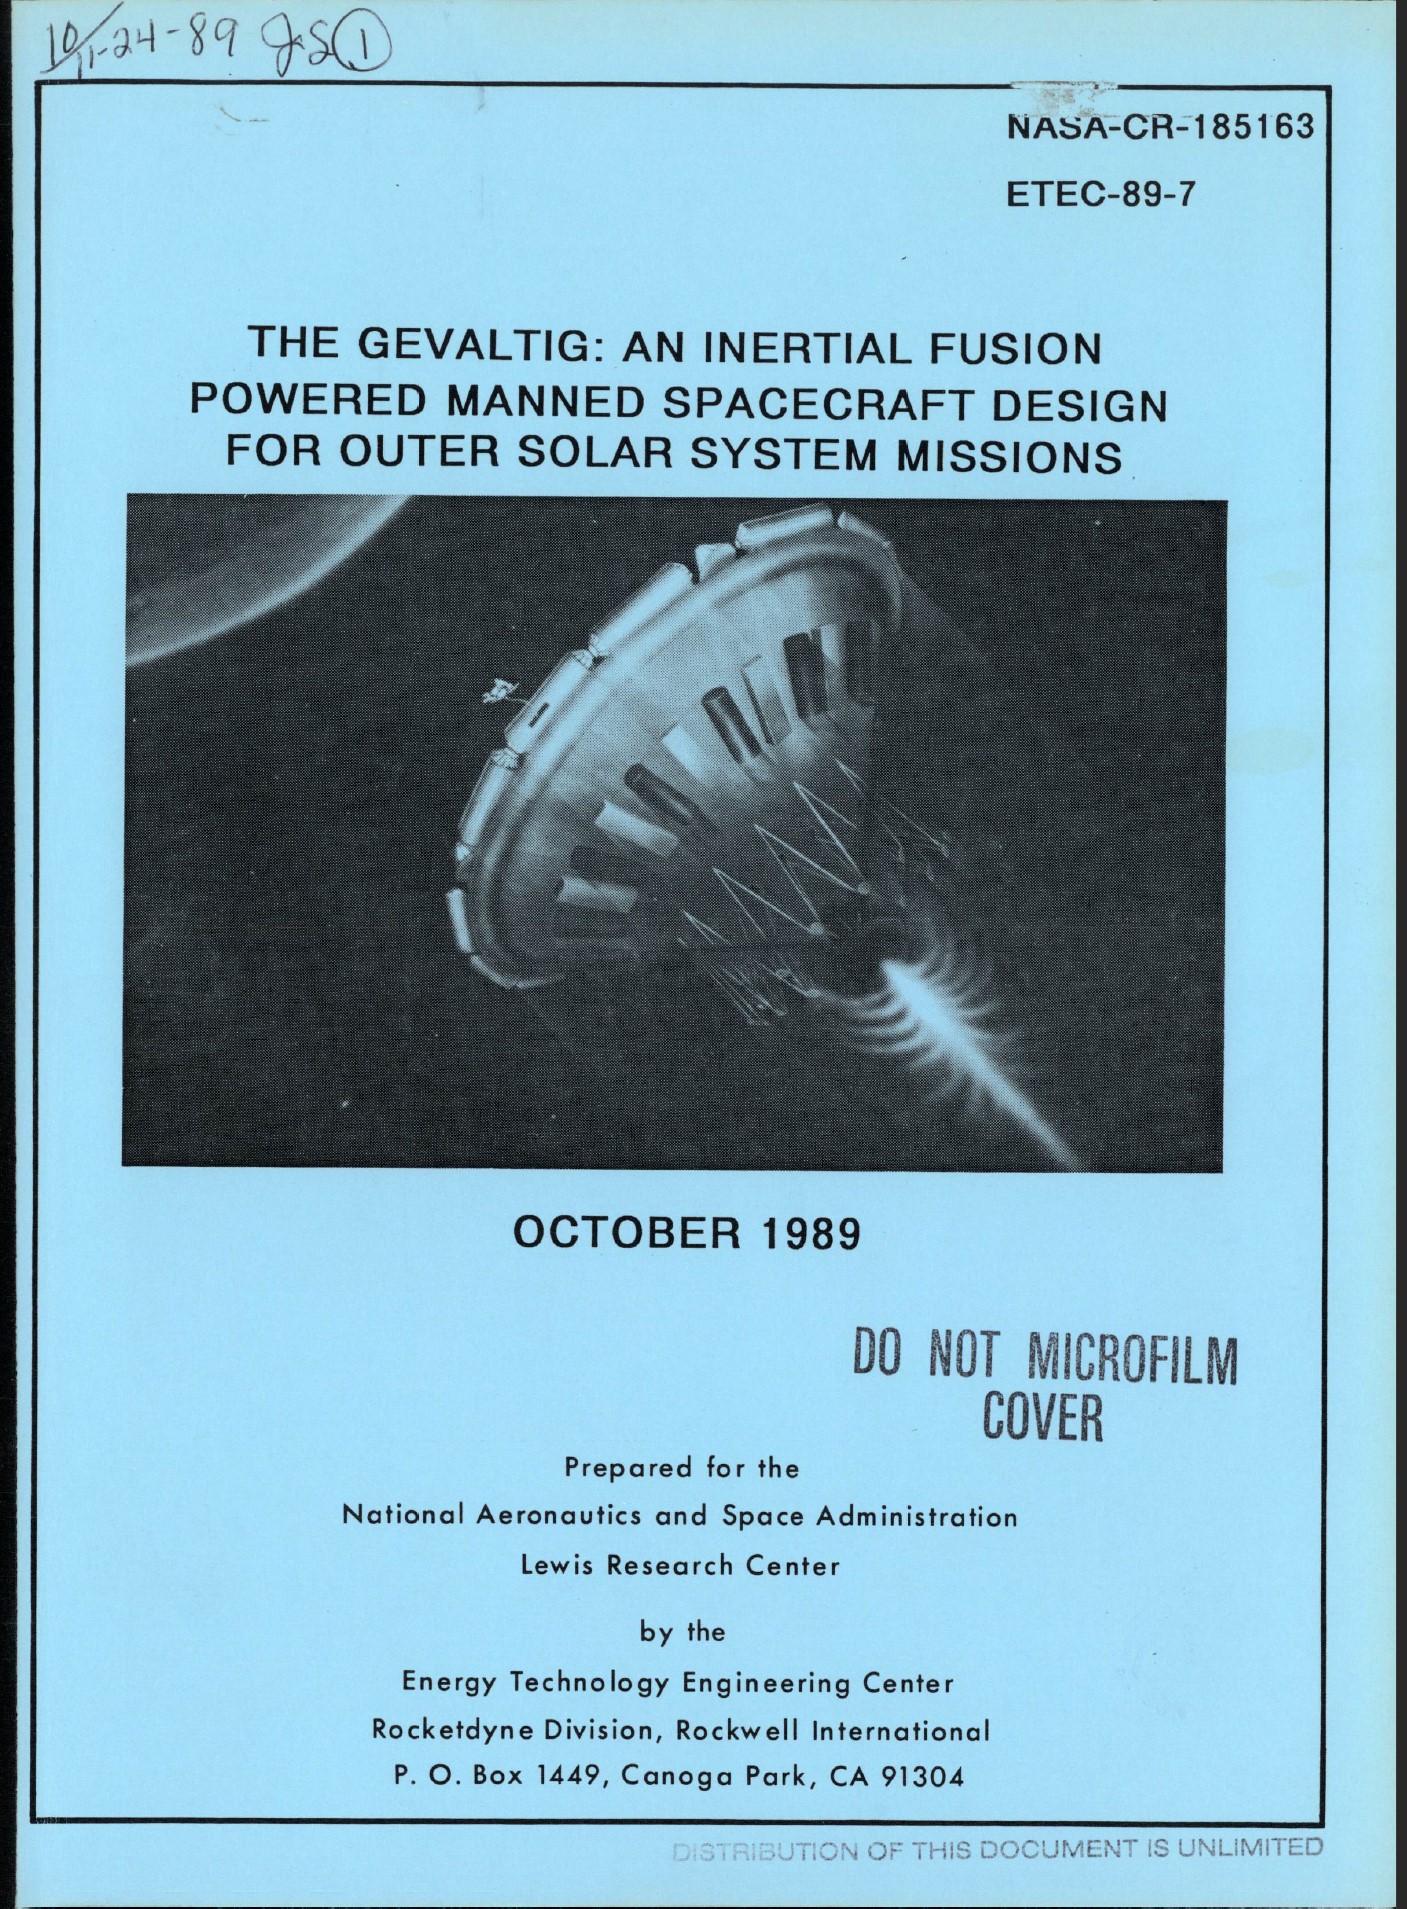 The cover of a 1989 NASA Lewis Research Center study on inertial confinement fusion propulsion.